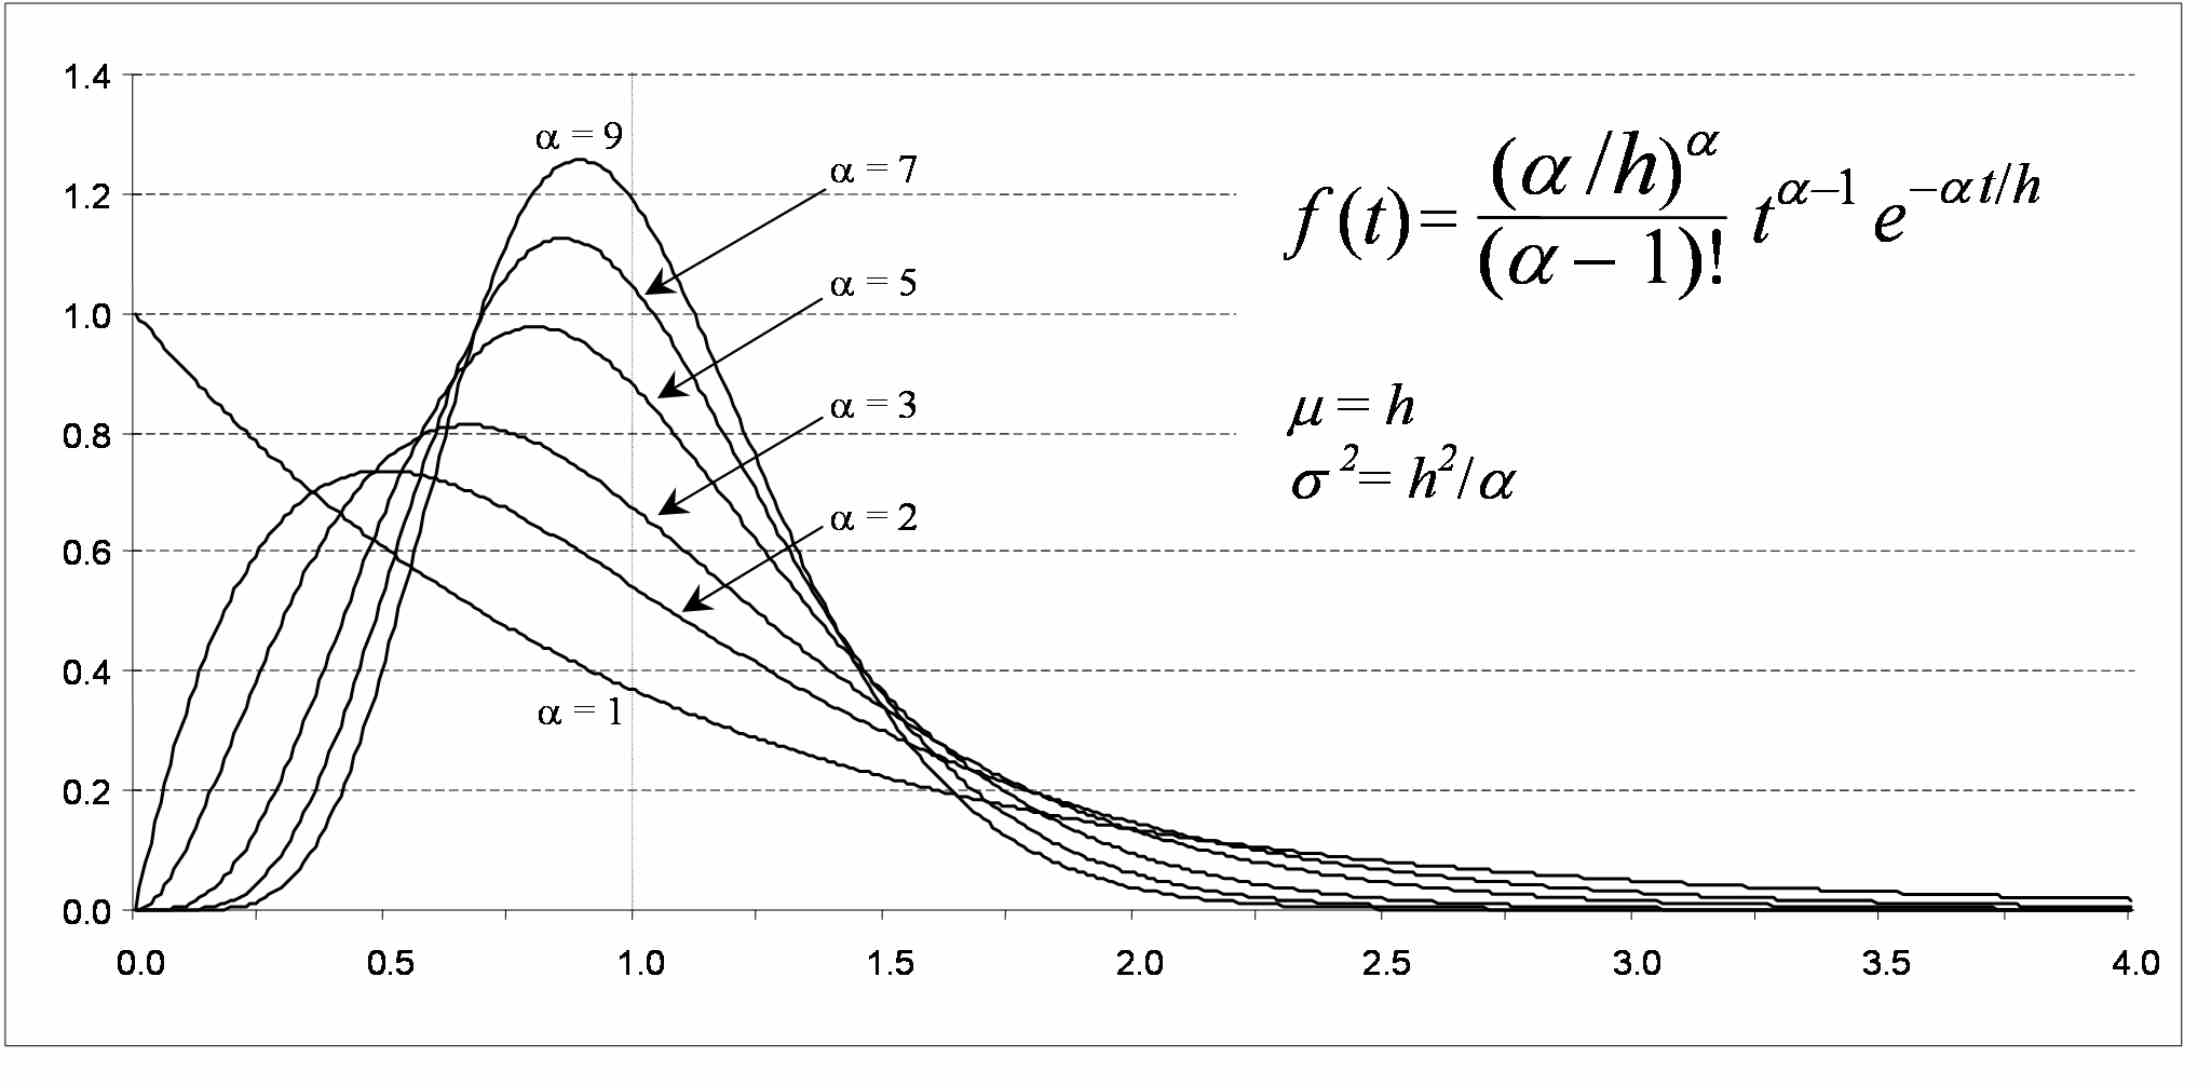 The analyst can specify the value of the Erlang distribution shape parameter to be used in generating vehicle entry headways. This figure illustrates the Erlang distribution for several values of the shape parameter and for a mean value of 1.  The graph shows the shape of the distributions produced by shape values of 1, 2, 3, 5, 7, and 9.  The larger shape values produce distributions that approach a normal distribution.